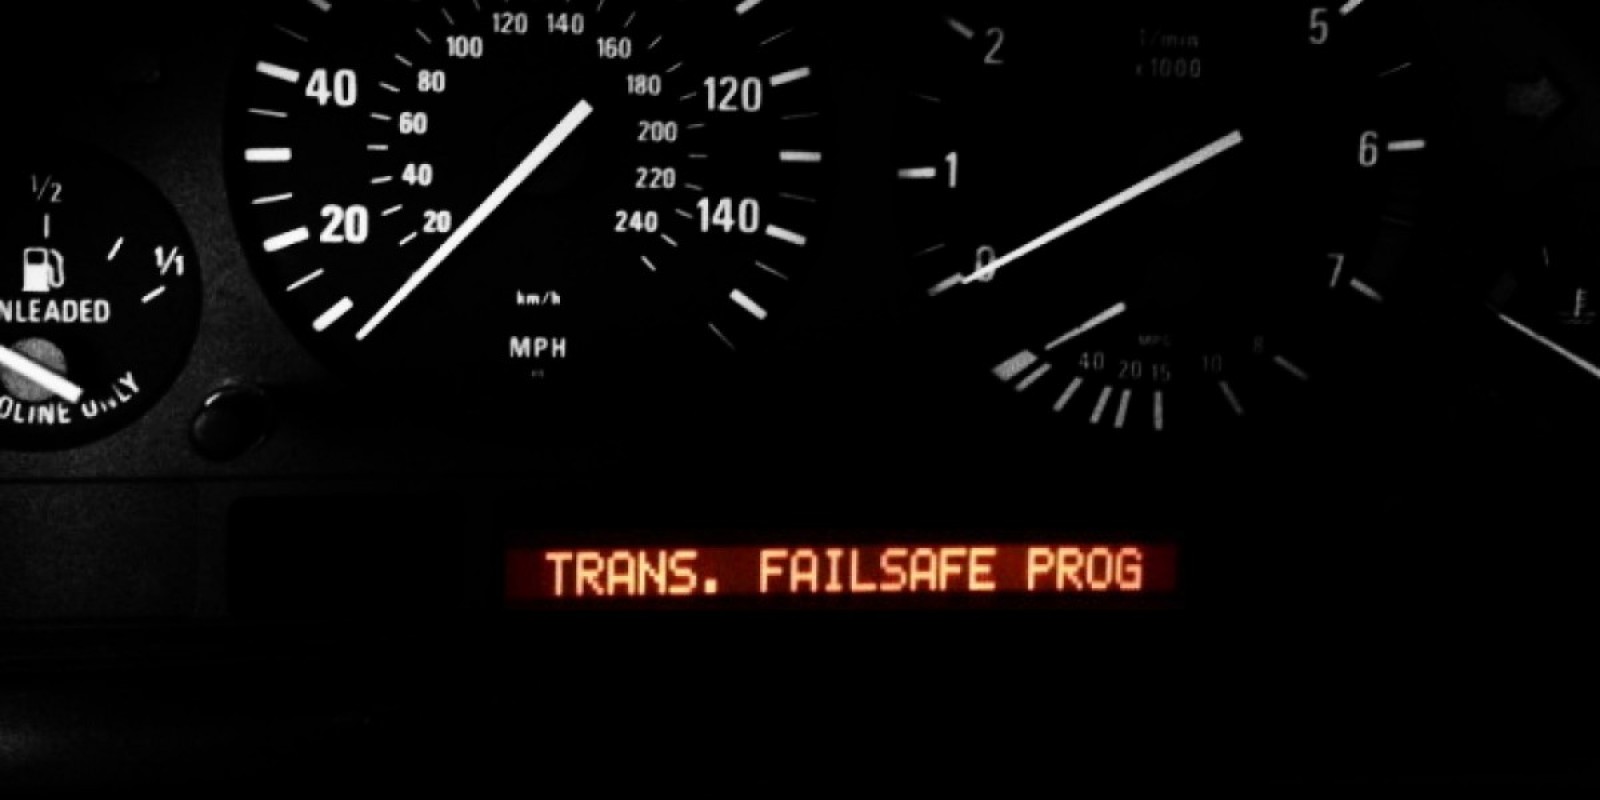 What is BMW transmission failsafe mode?